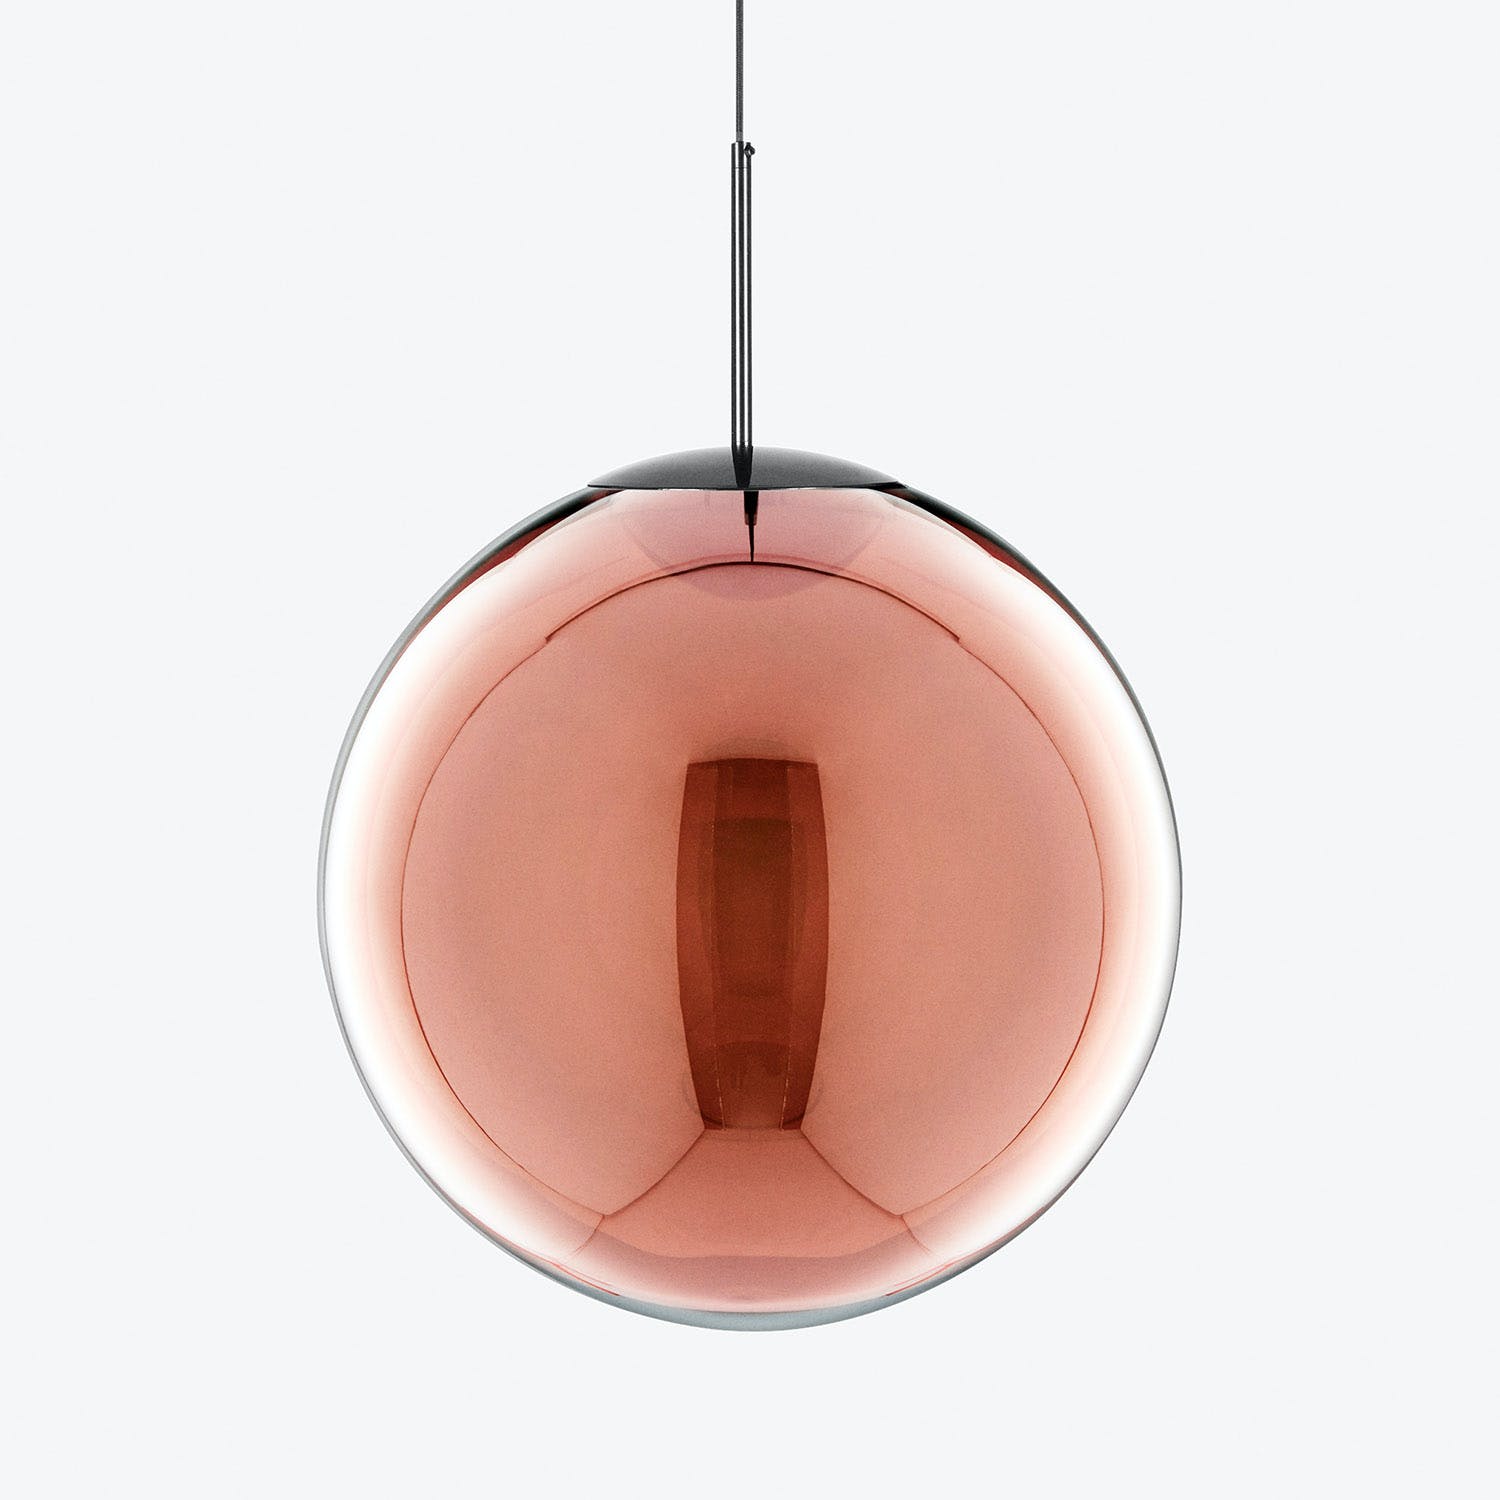 Contemporary pendant light with mirrored sphere and geometric aesthetic.